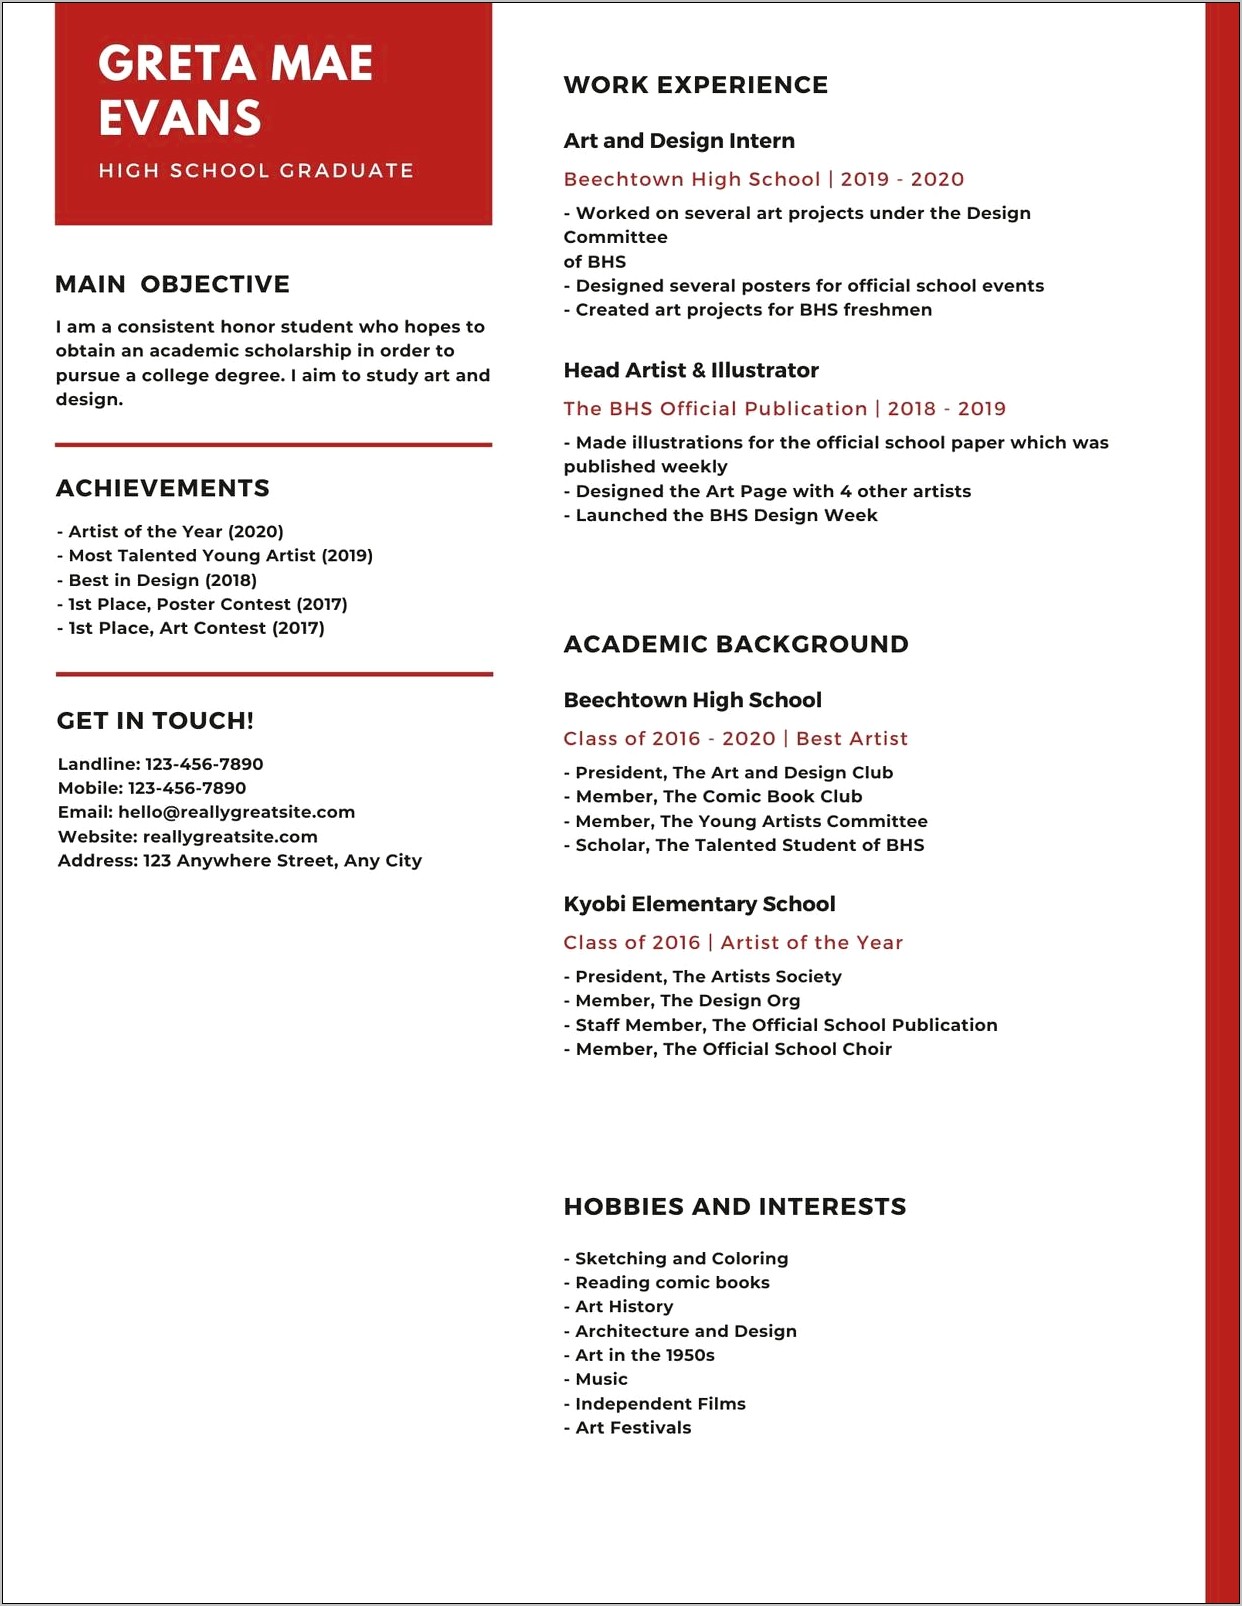 Resume For Recently Graduated High School